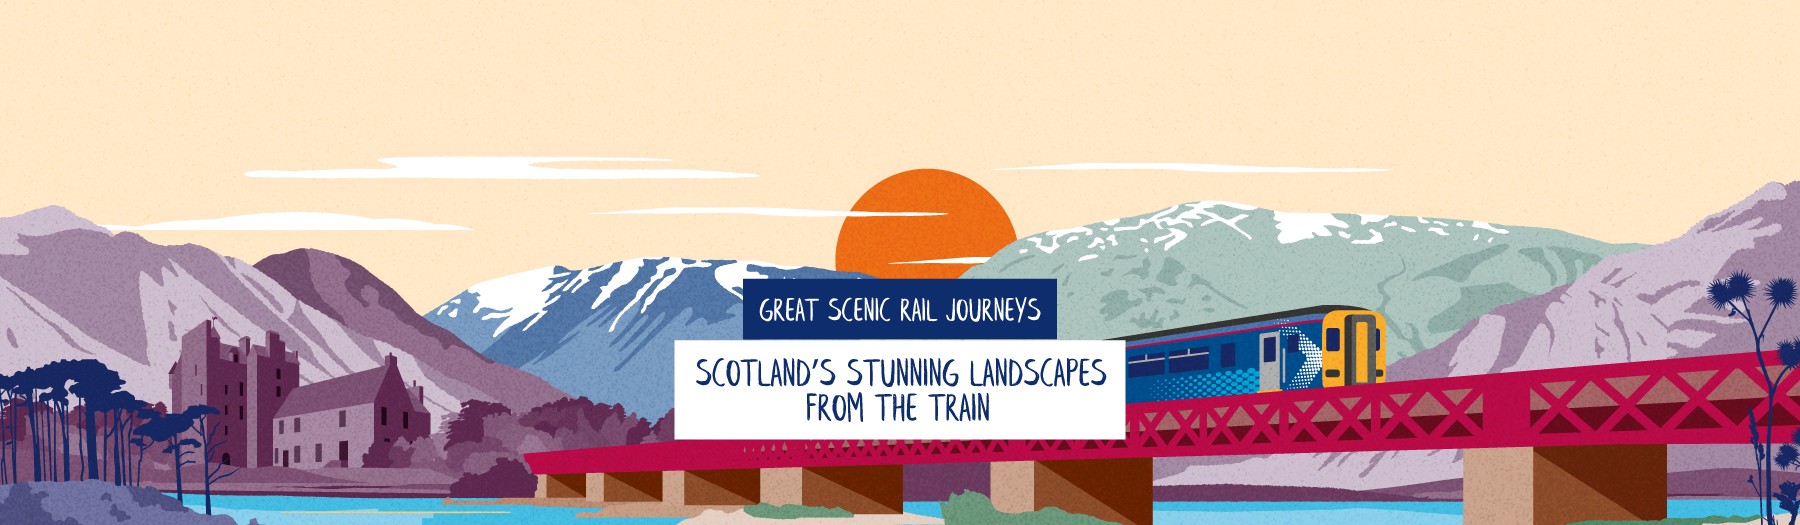 Great Scenic Rail Journeys - Scotland's stunning landscapes from train